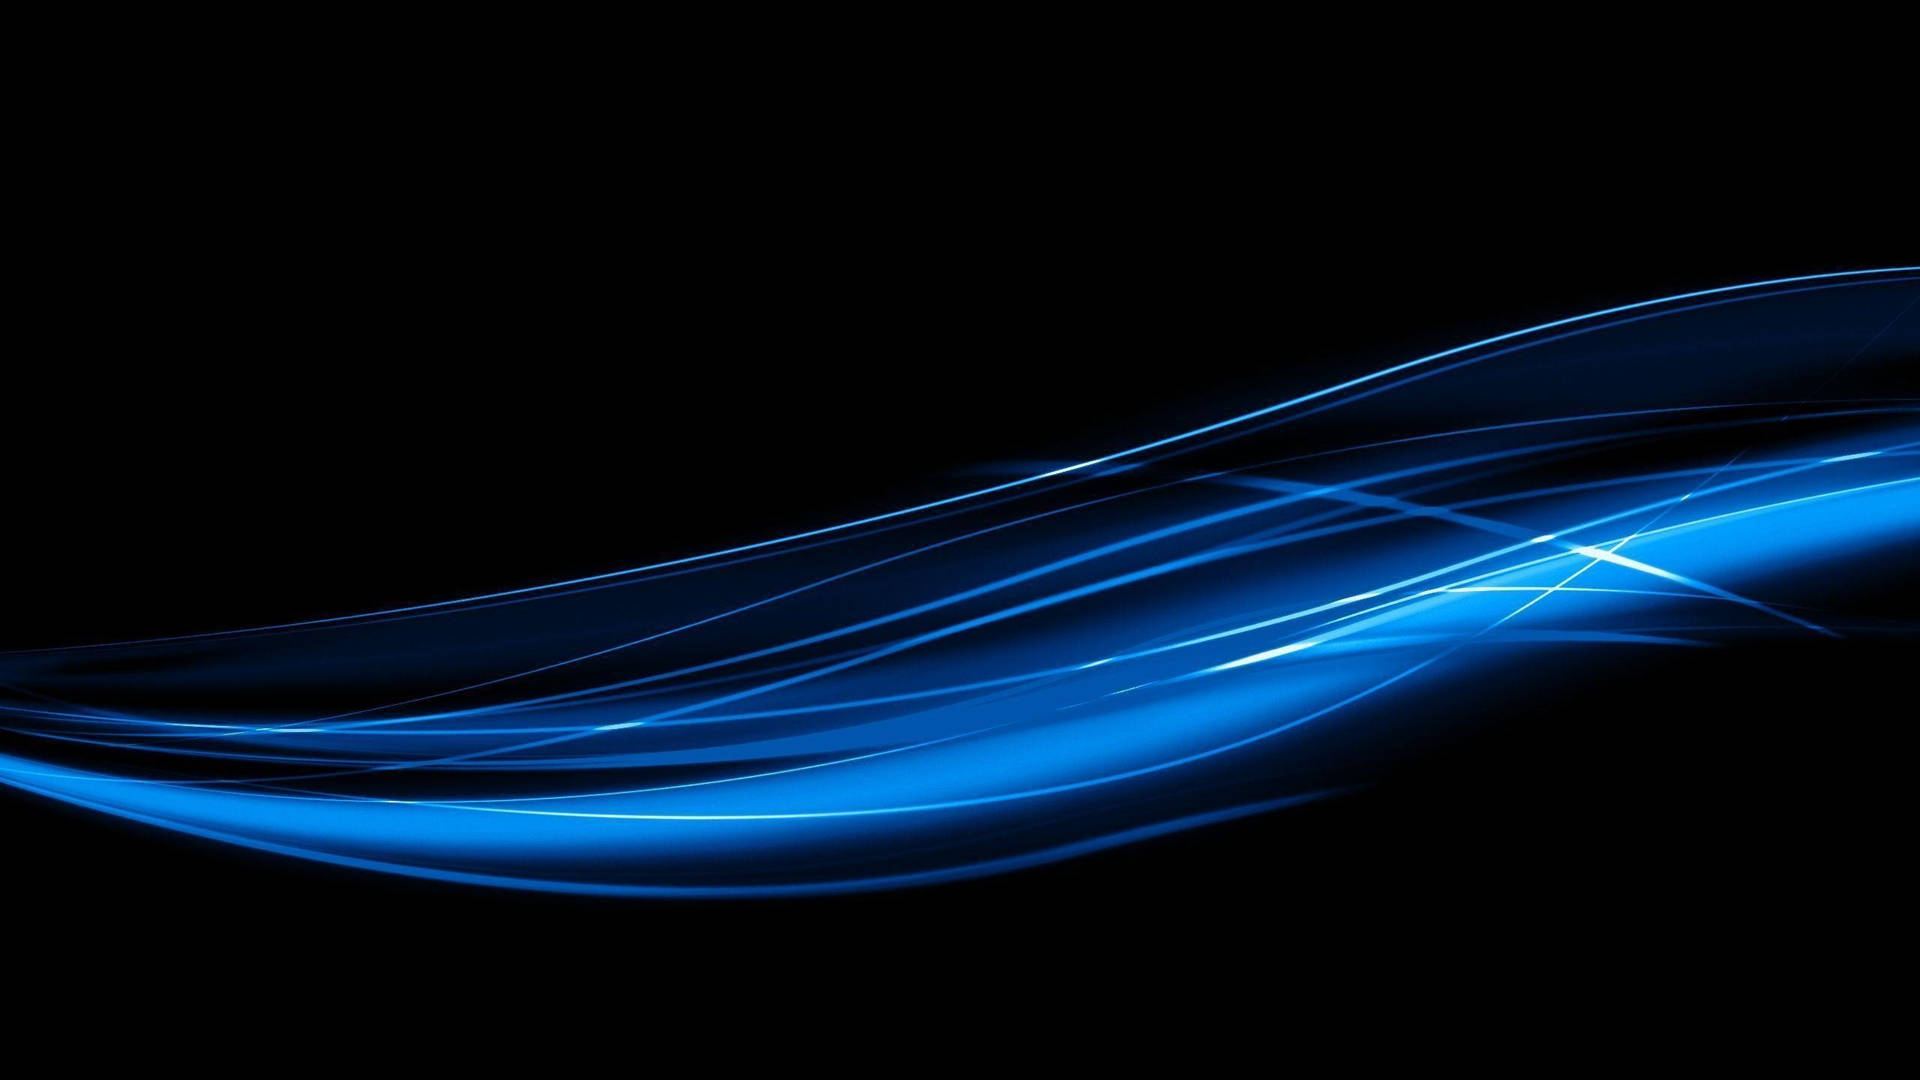 Black And Blue Background Showing Thread Waves Wallpaper